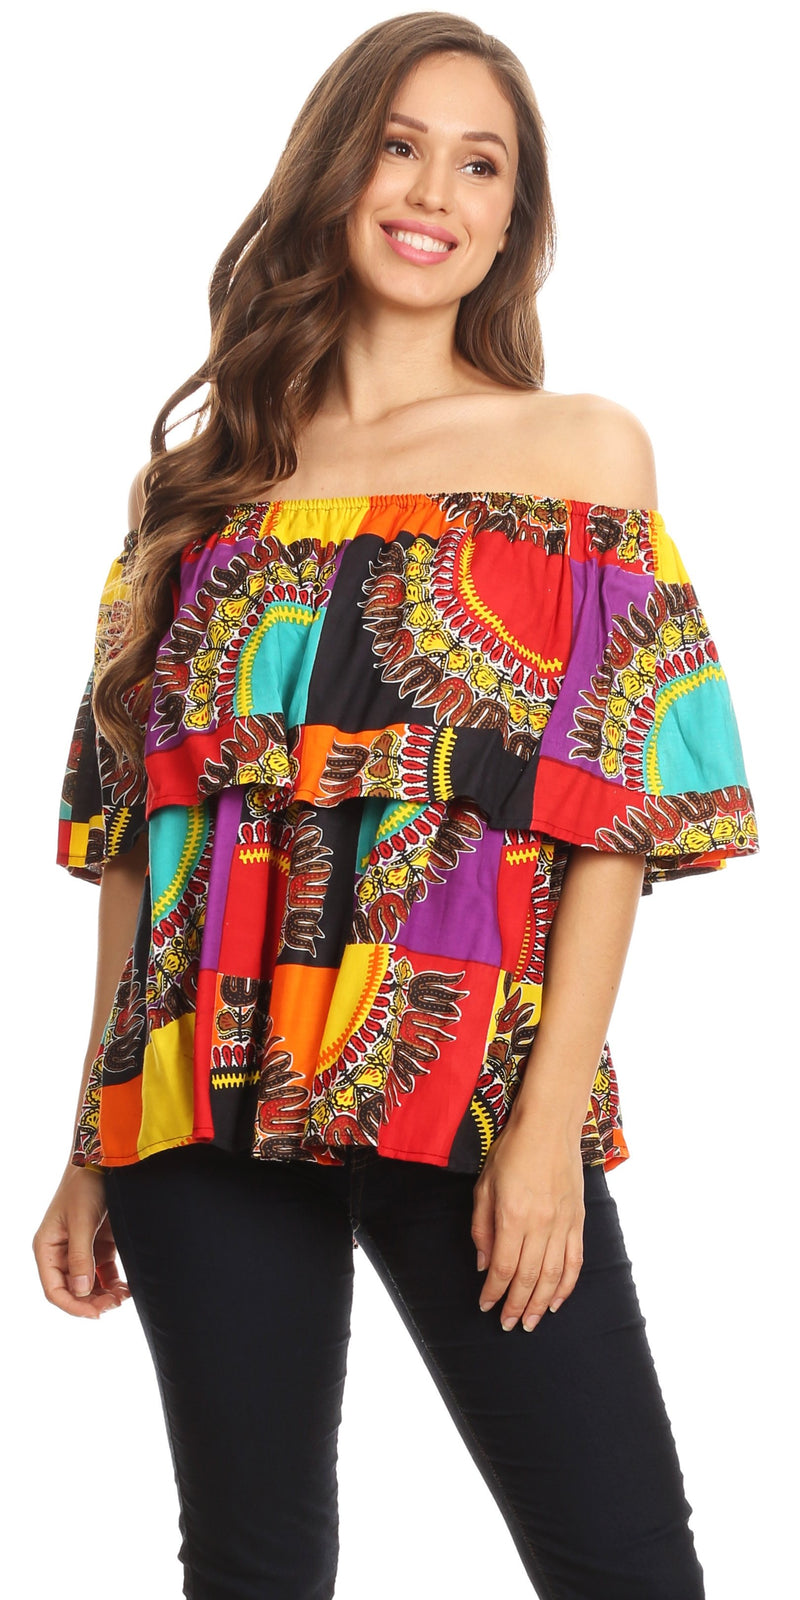 Sakkas Azra Casual Colorful African Dashiki Off-Shoulder Blouse Top Flowy and Fun!